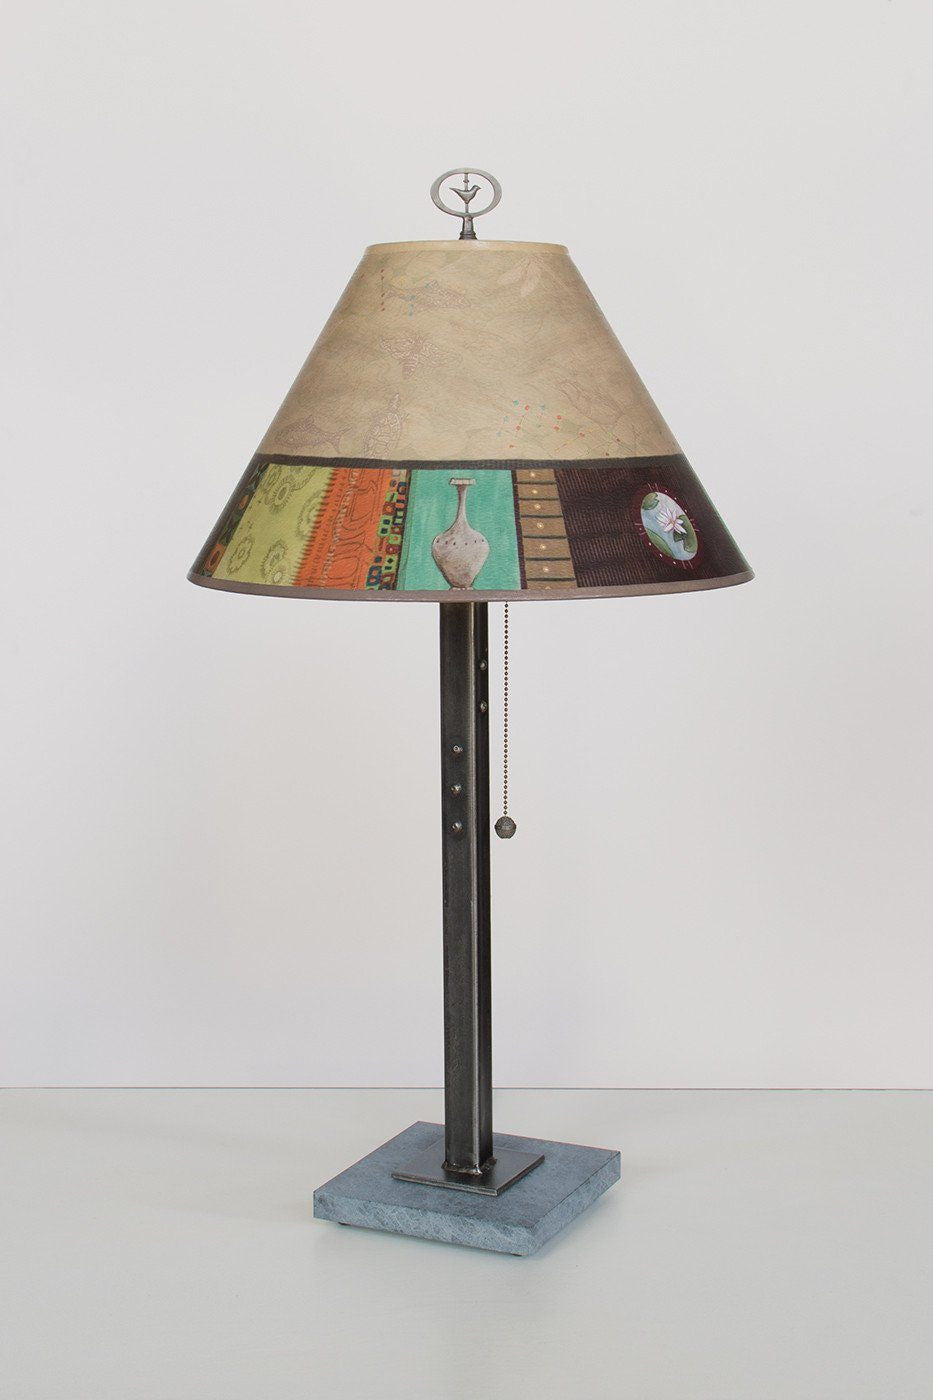 Steel Table Lamp on Marble with Medium Conical Shade in Linen Match Lit